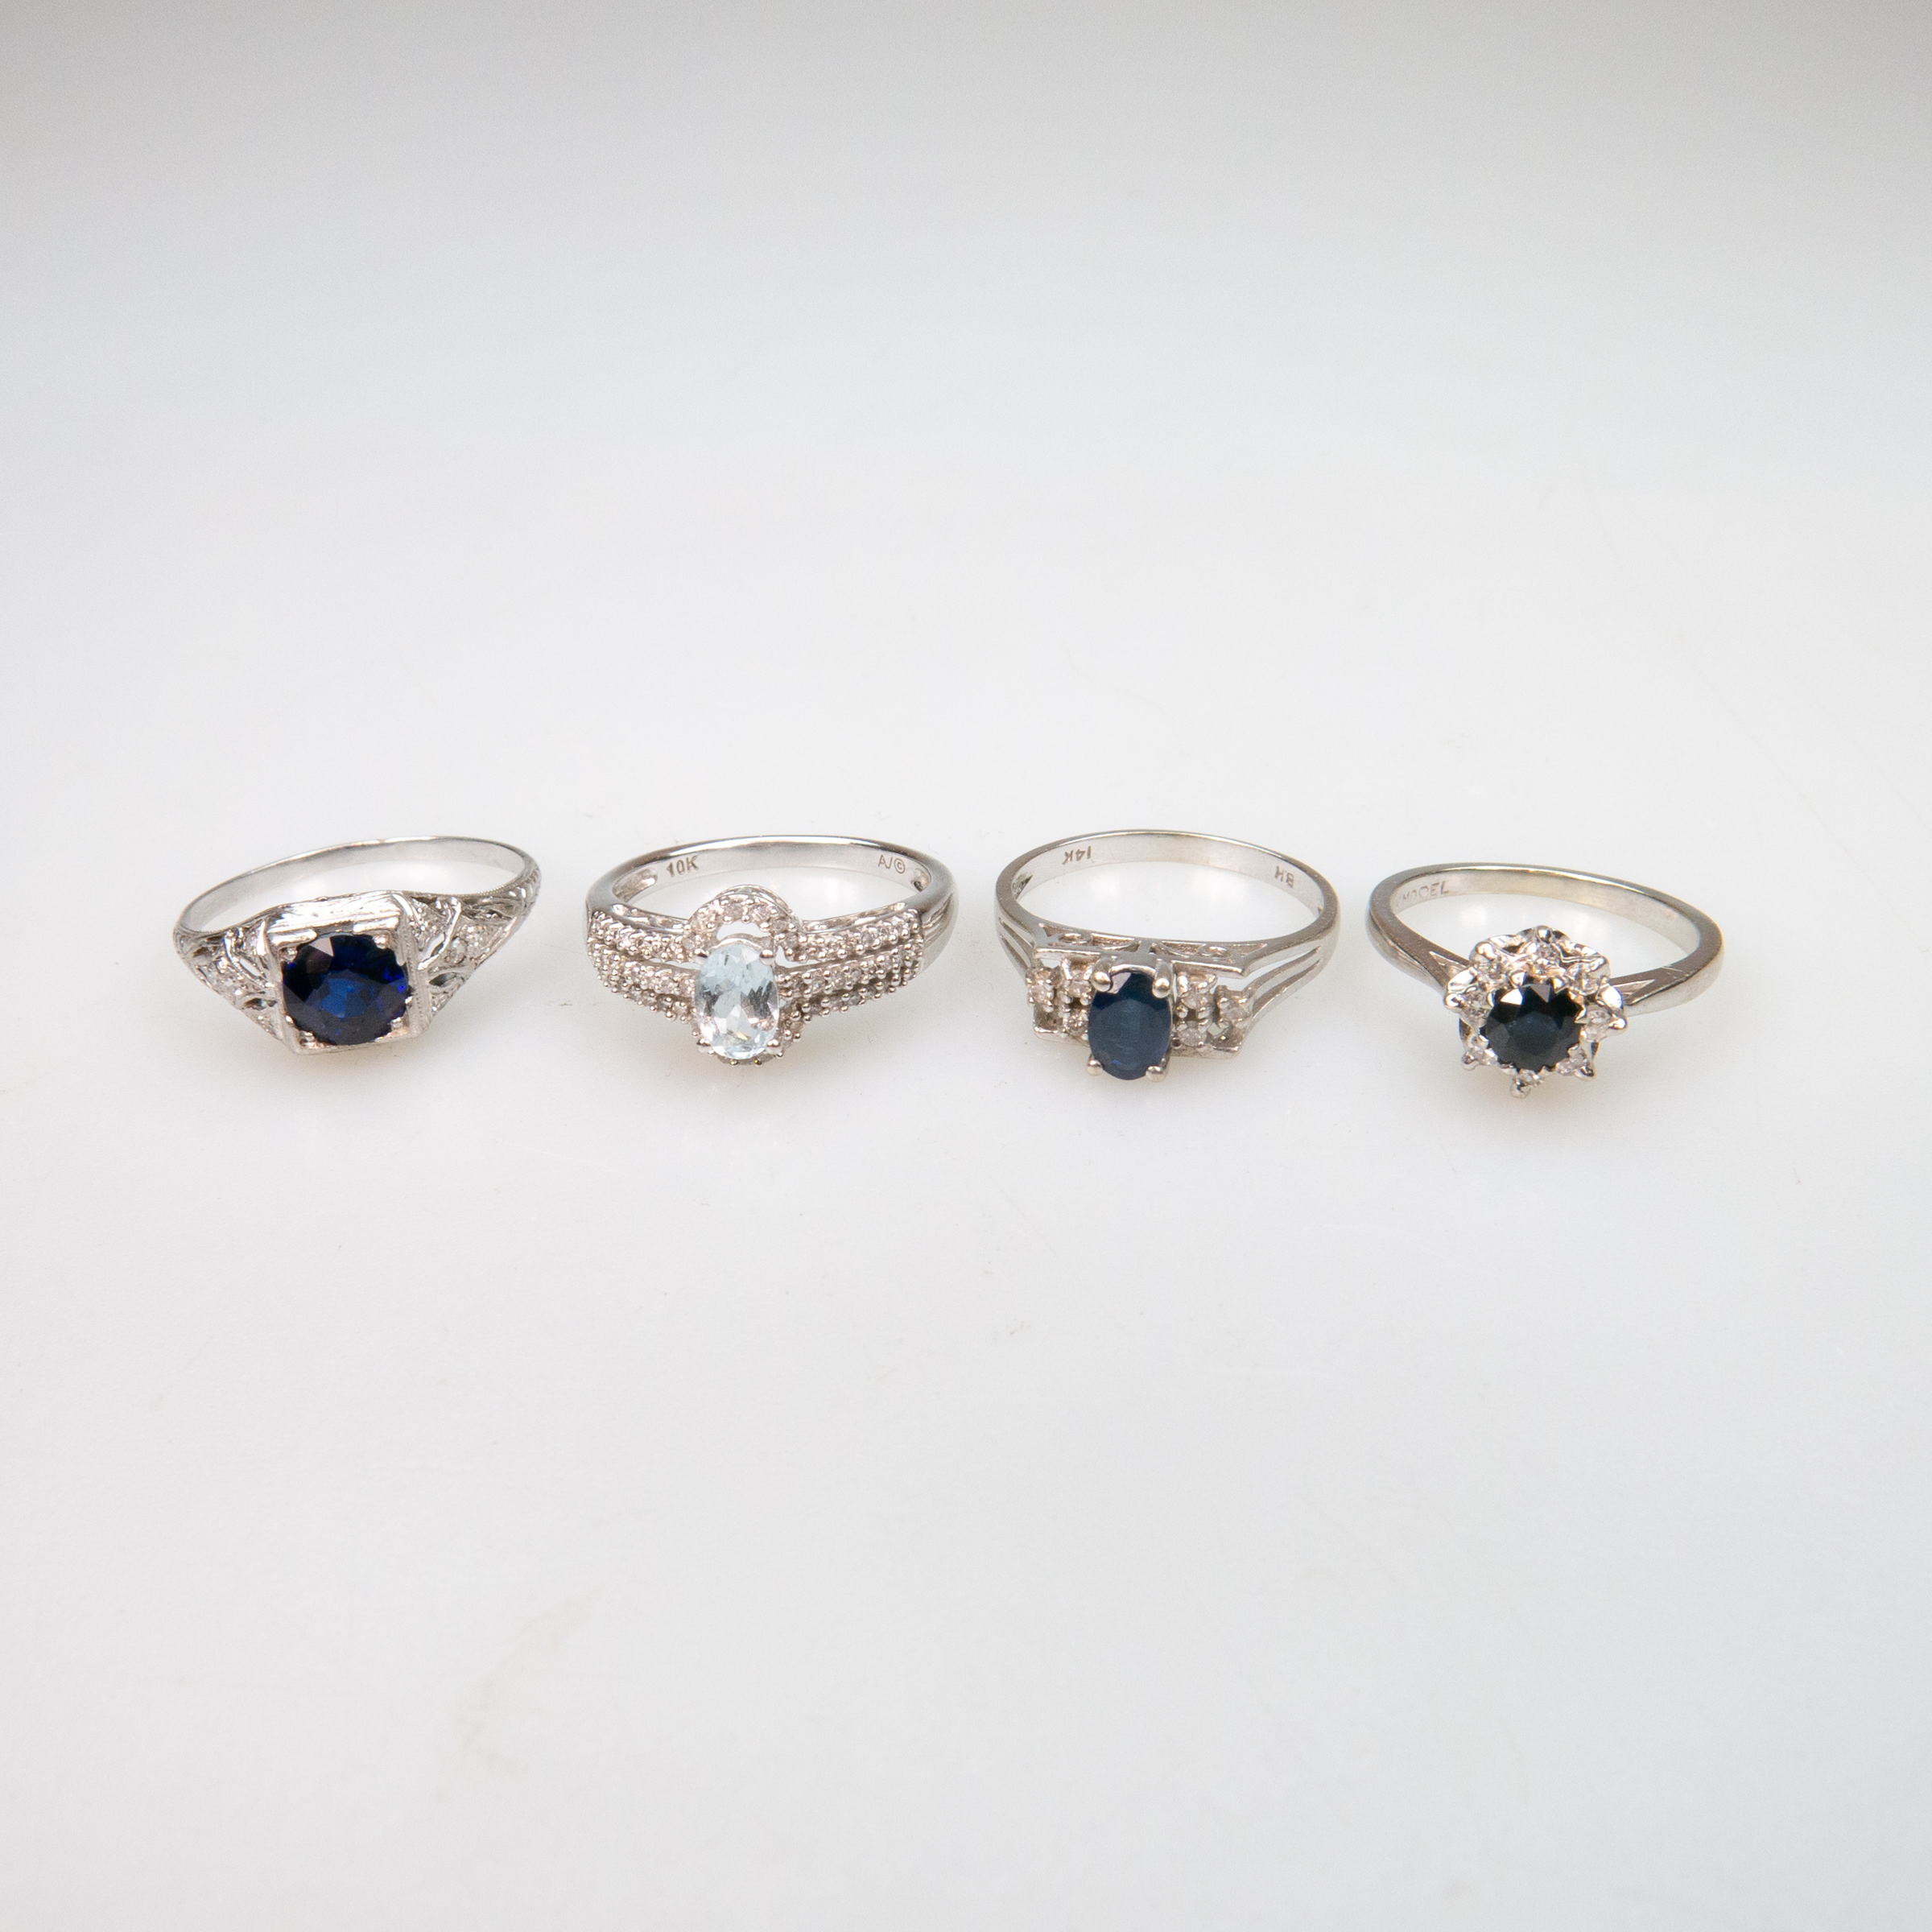 2 x 10k And 2 x 14k White Gold Rings 